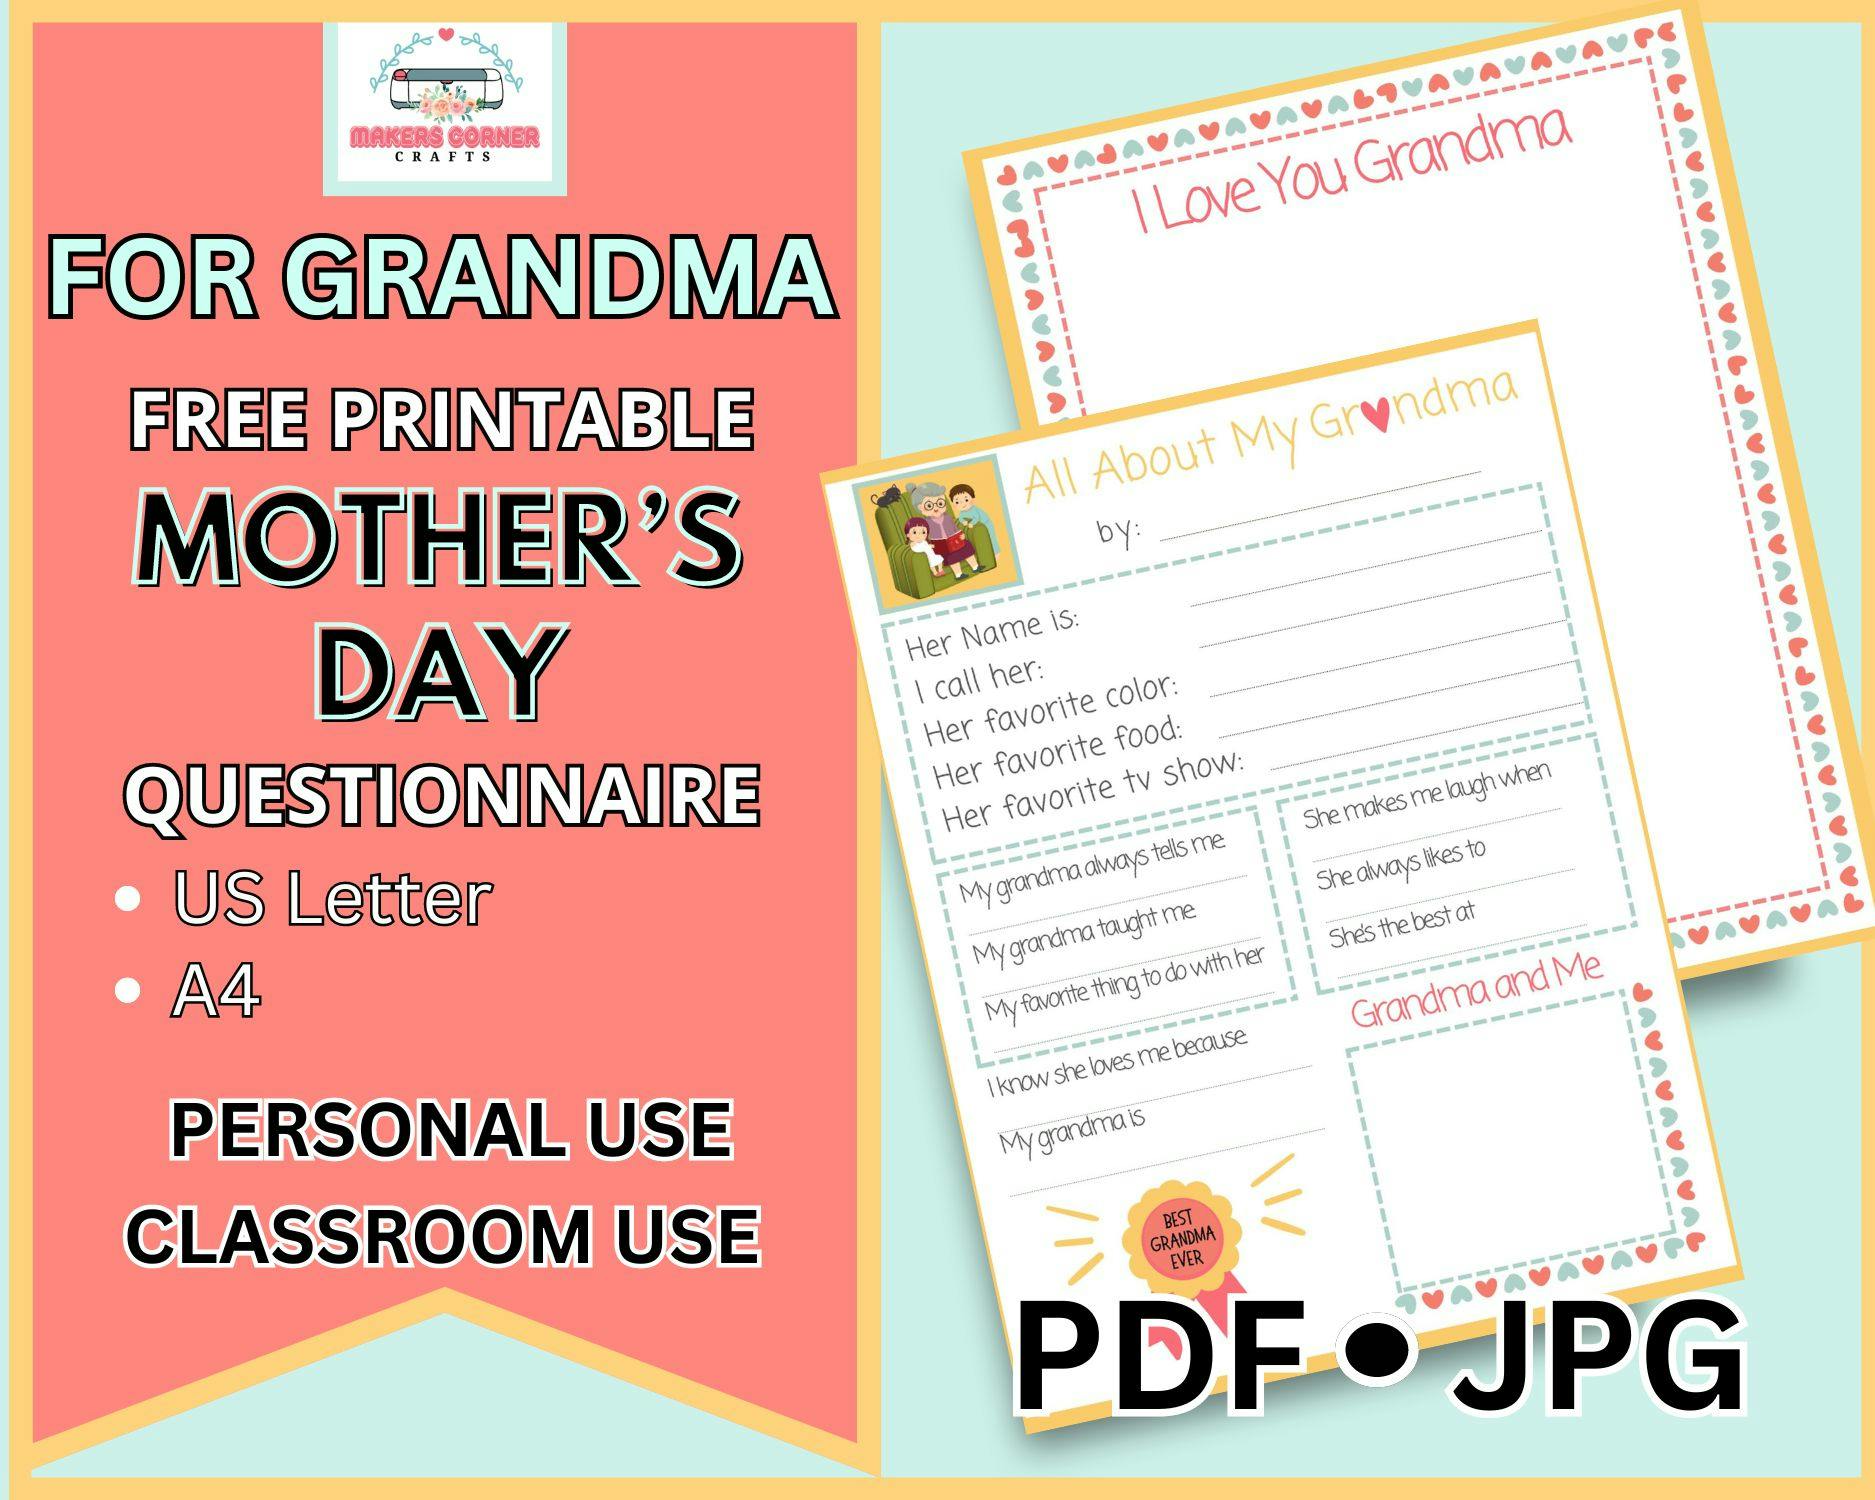 Free Printable Mother's Day Questionnaire for Grandma